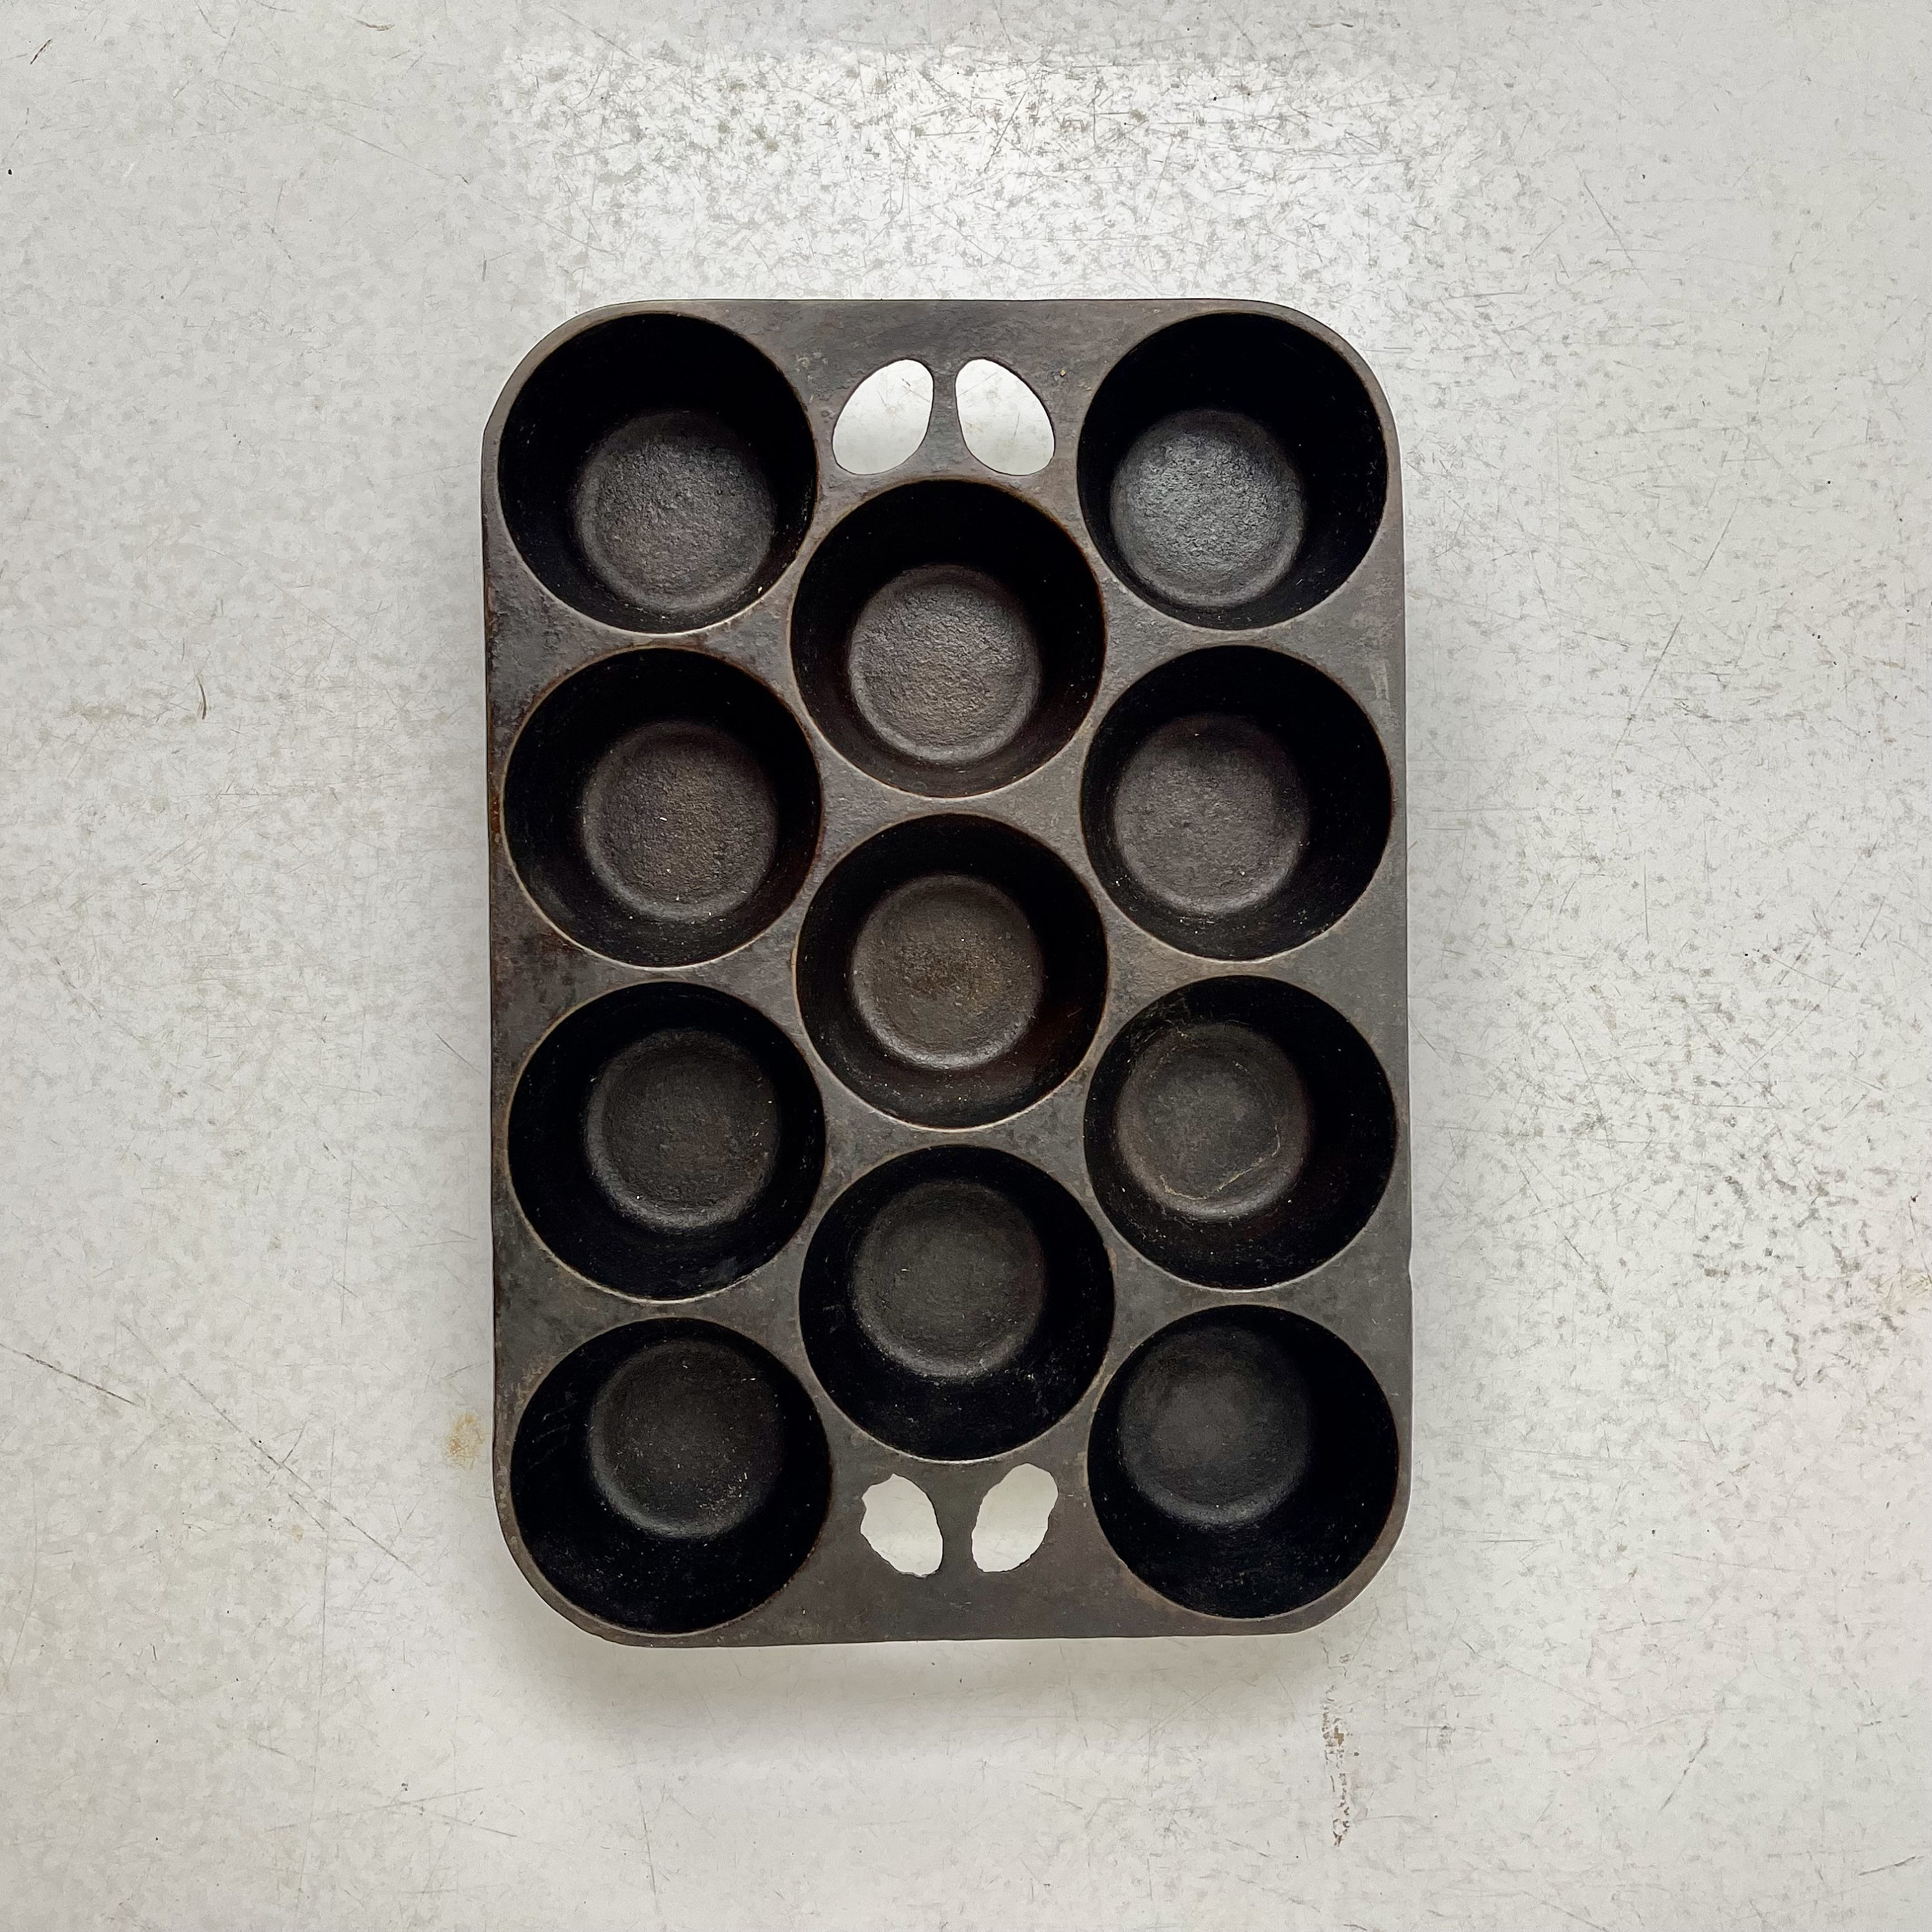 Muffins And Cast Iron Muffin Pan Stock Photo - Download Image Now